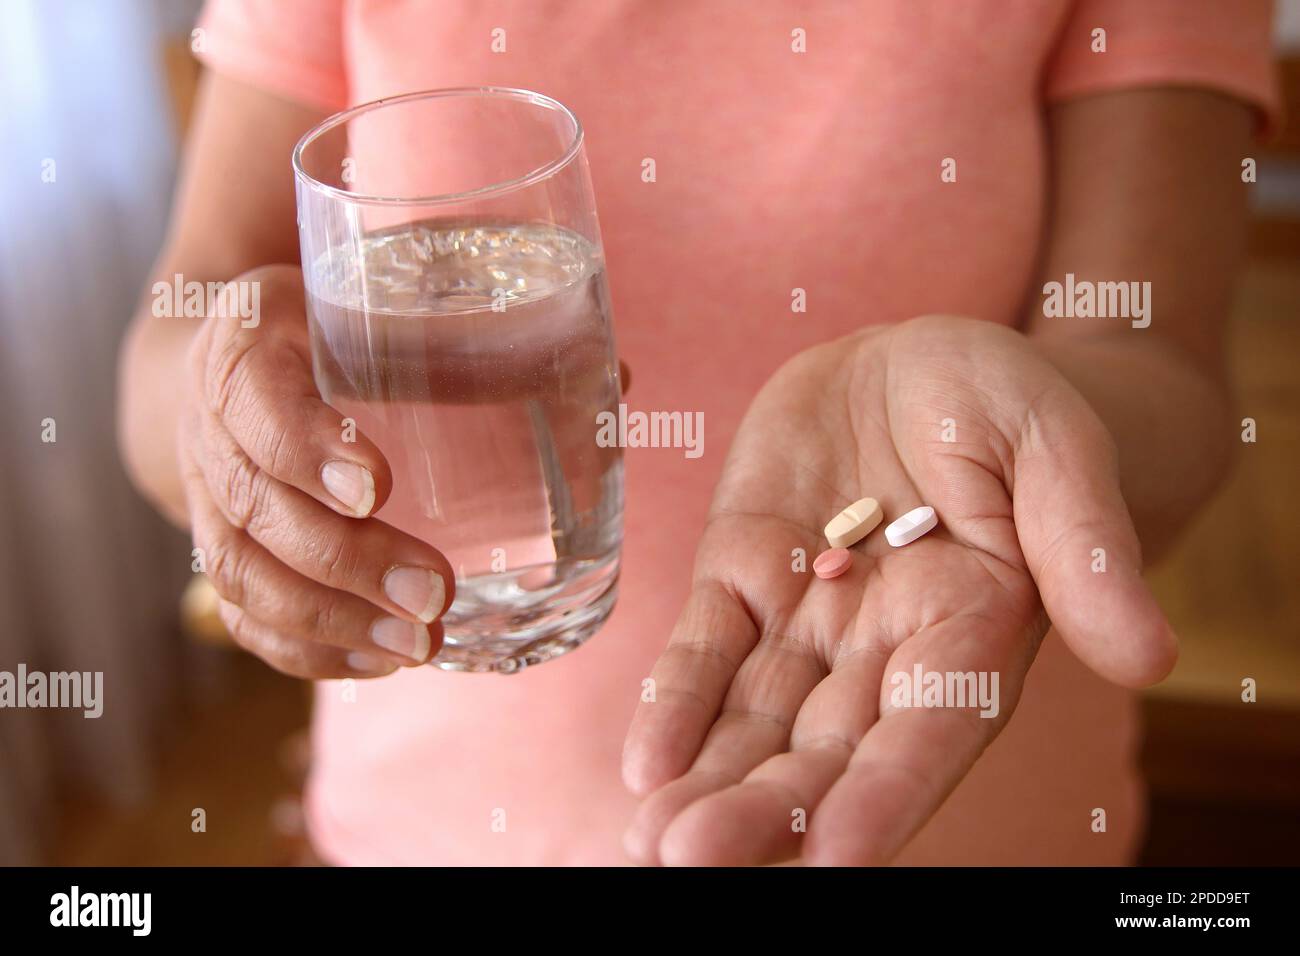 taking pills, woman holding pills and glass of water in her hands Stock Photo